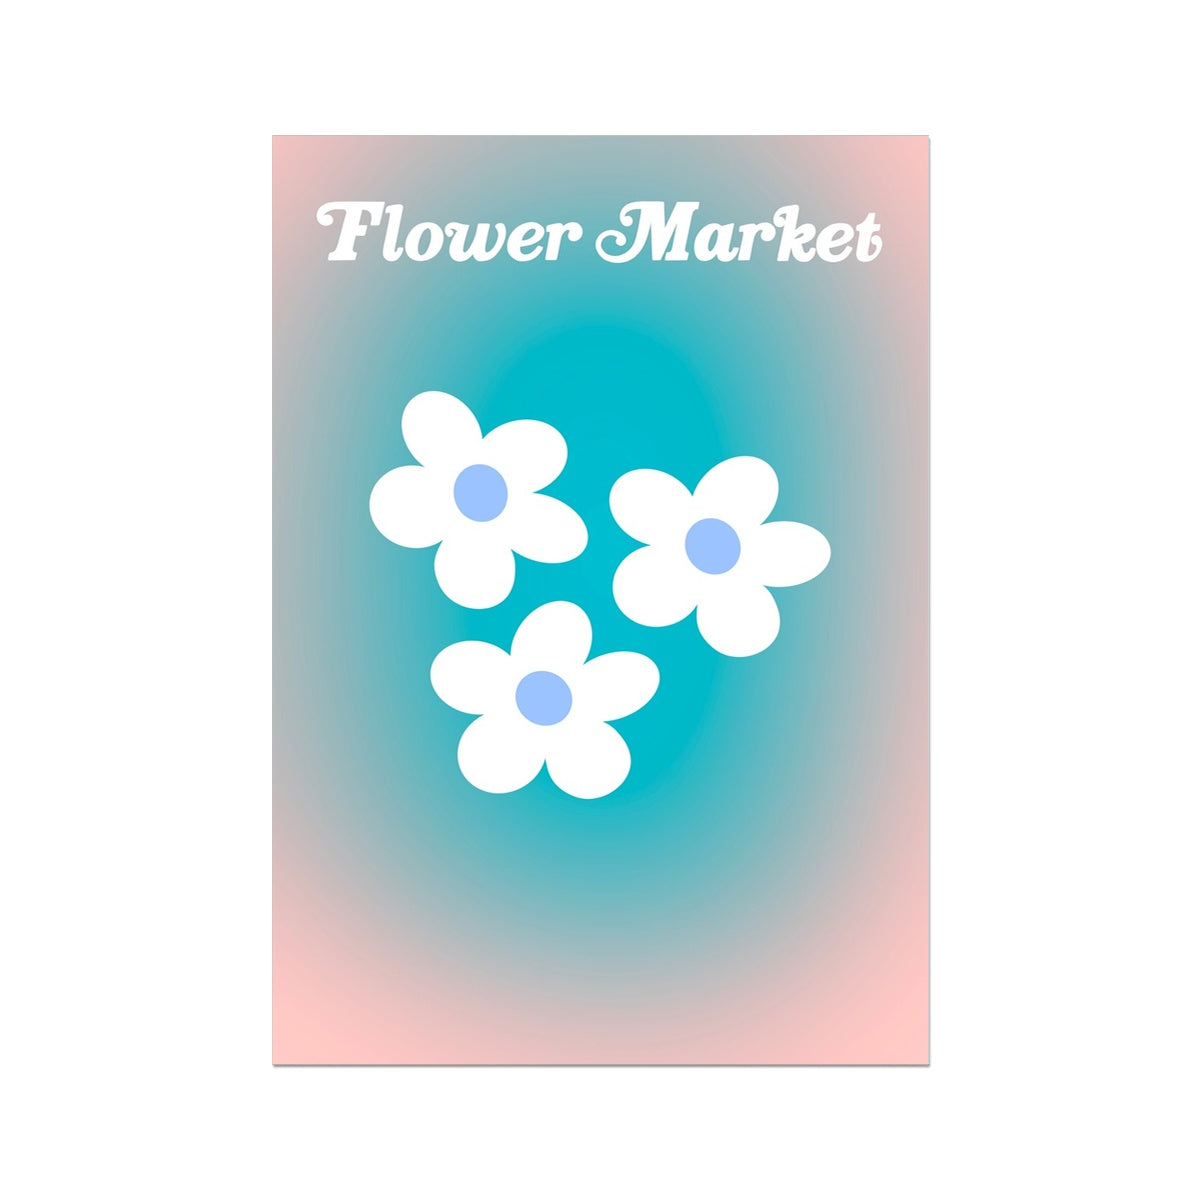 The Flower Market / Sunset collection features wall art with sunset colored aura gradients and daisy illustrations under original hand drawn typography. Sorbet colored flower market prints that make beautiful danish pastel style posters.